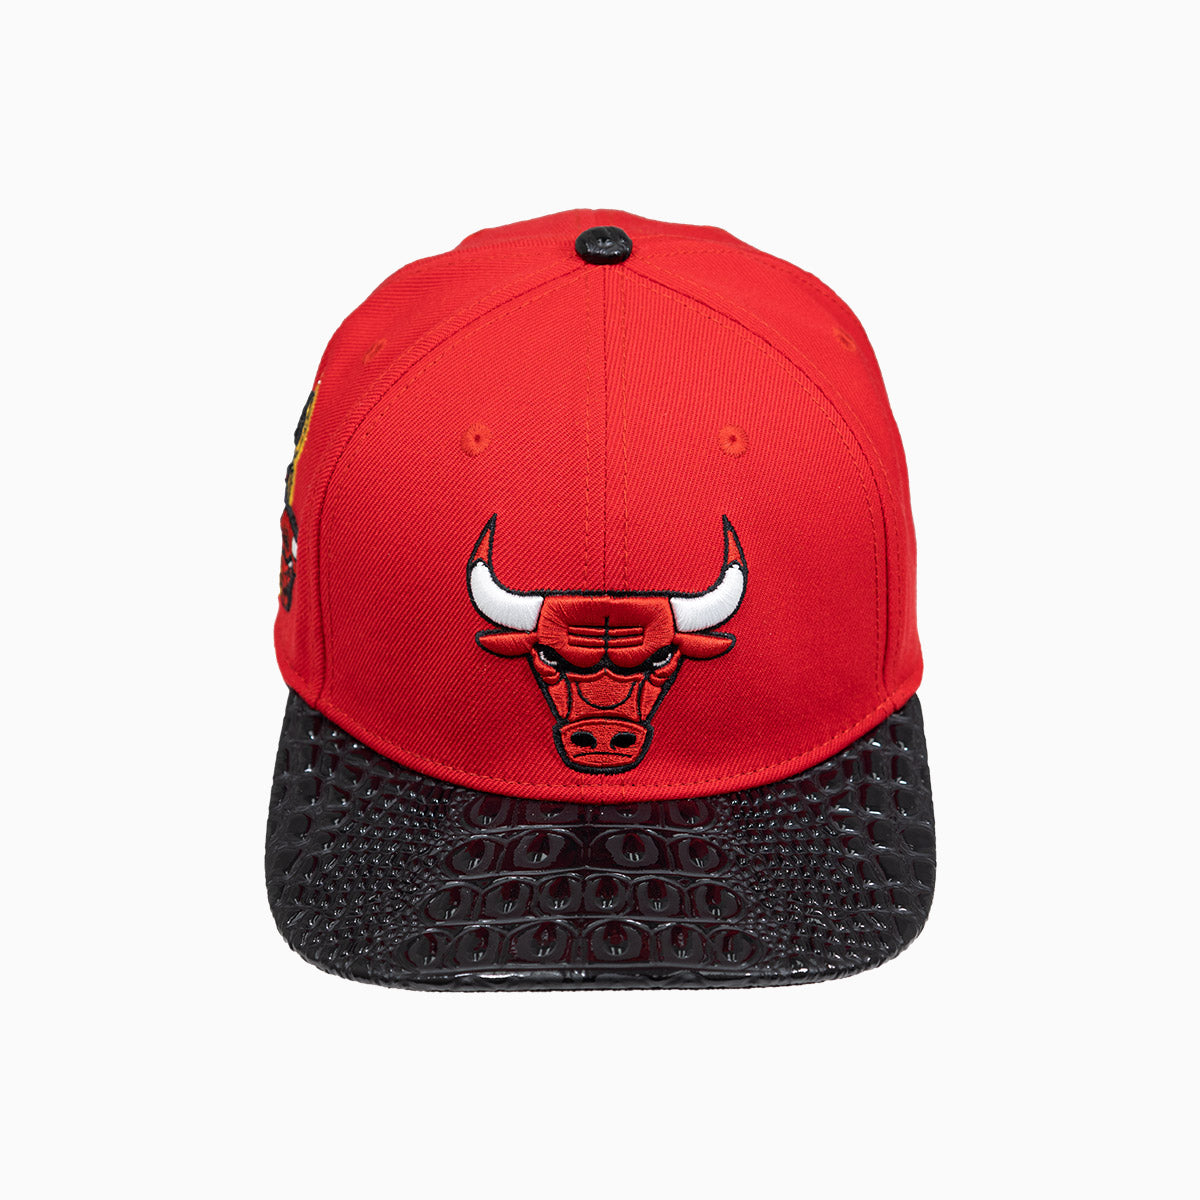 pro-standard-chicago-bulls-nba-hat-with-leather-visor-bcb756501a1-rbk